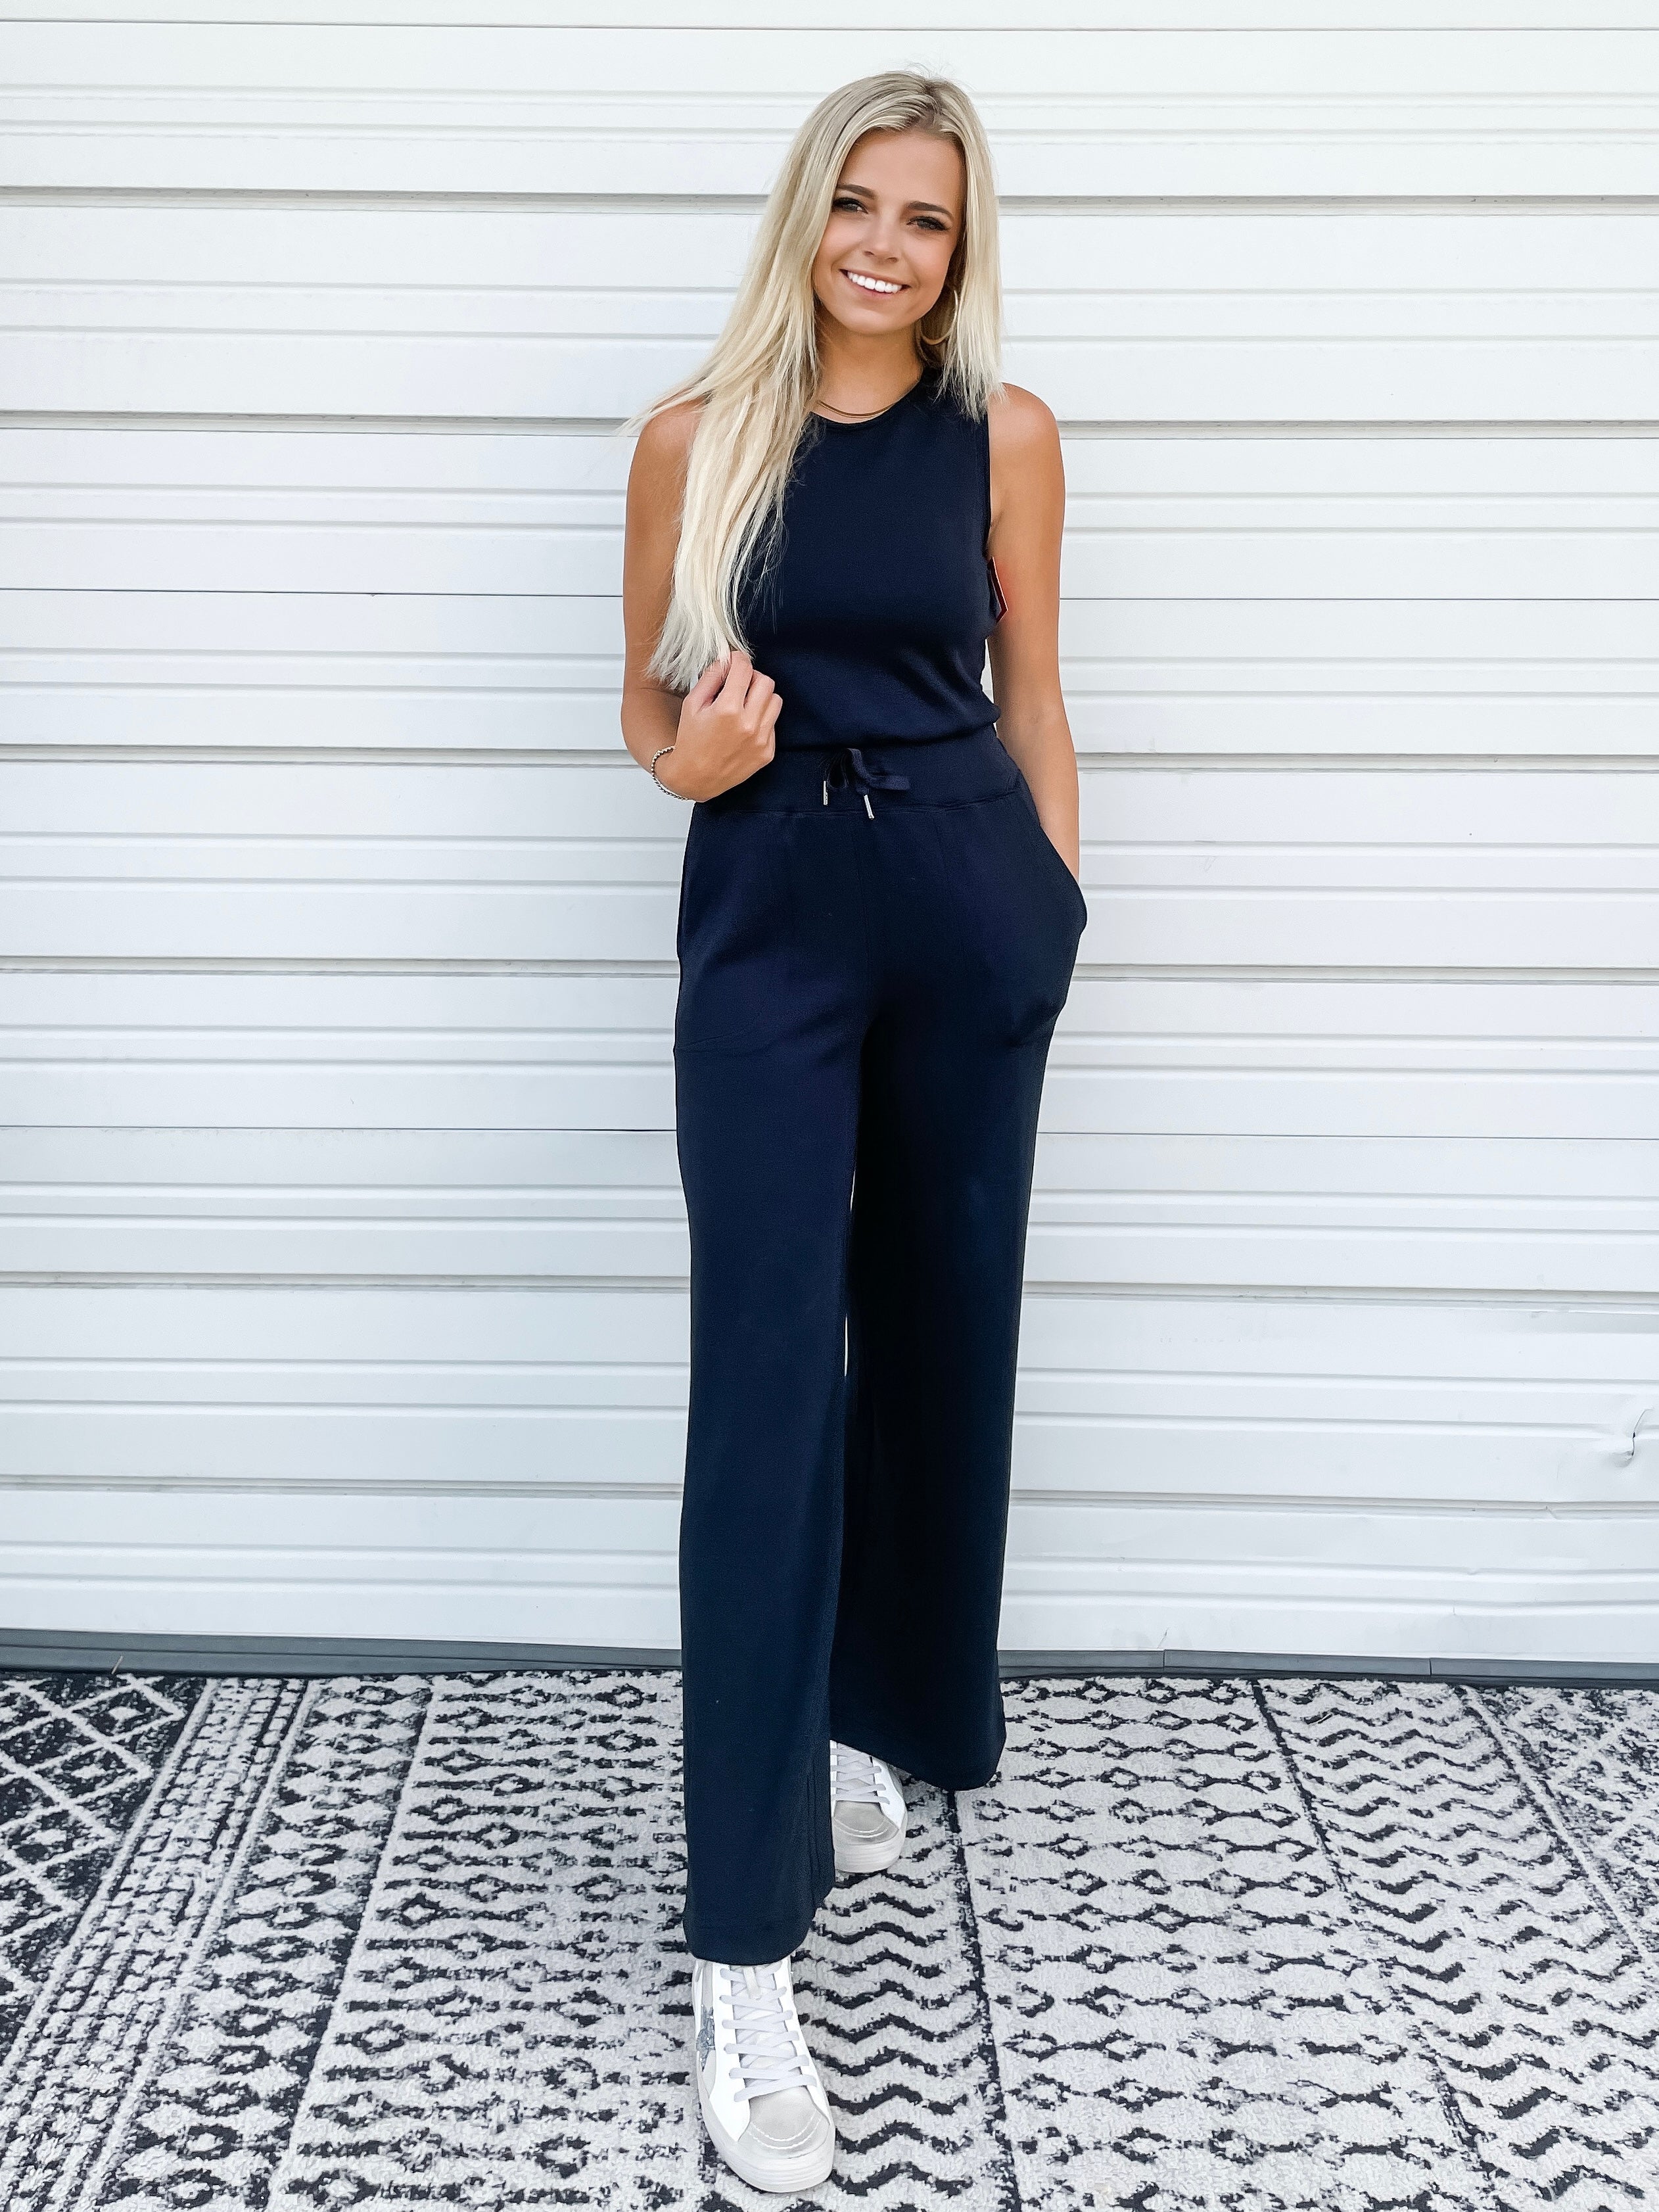 Three ways to style the @spanx AirEssentials Jumpsuit, which can